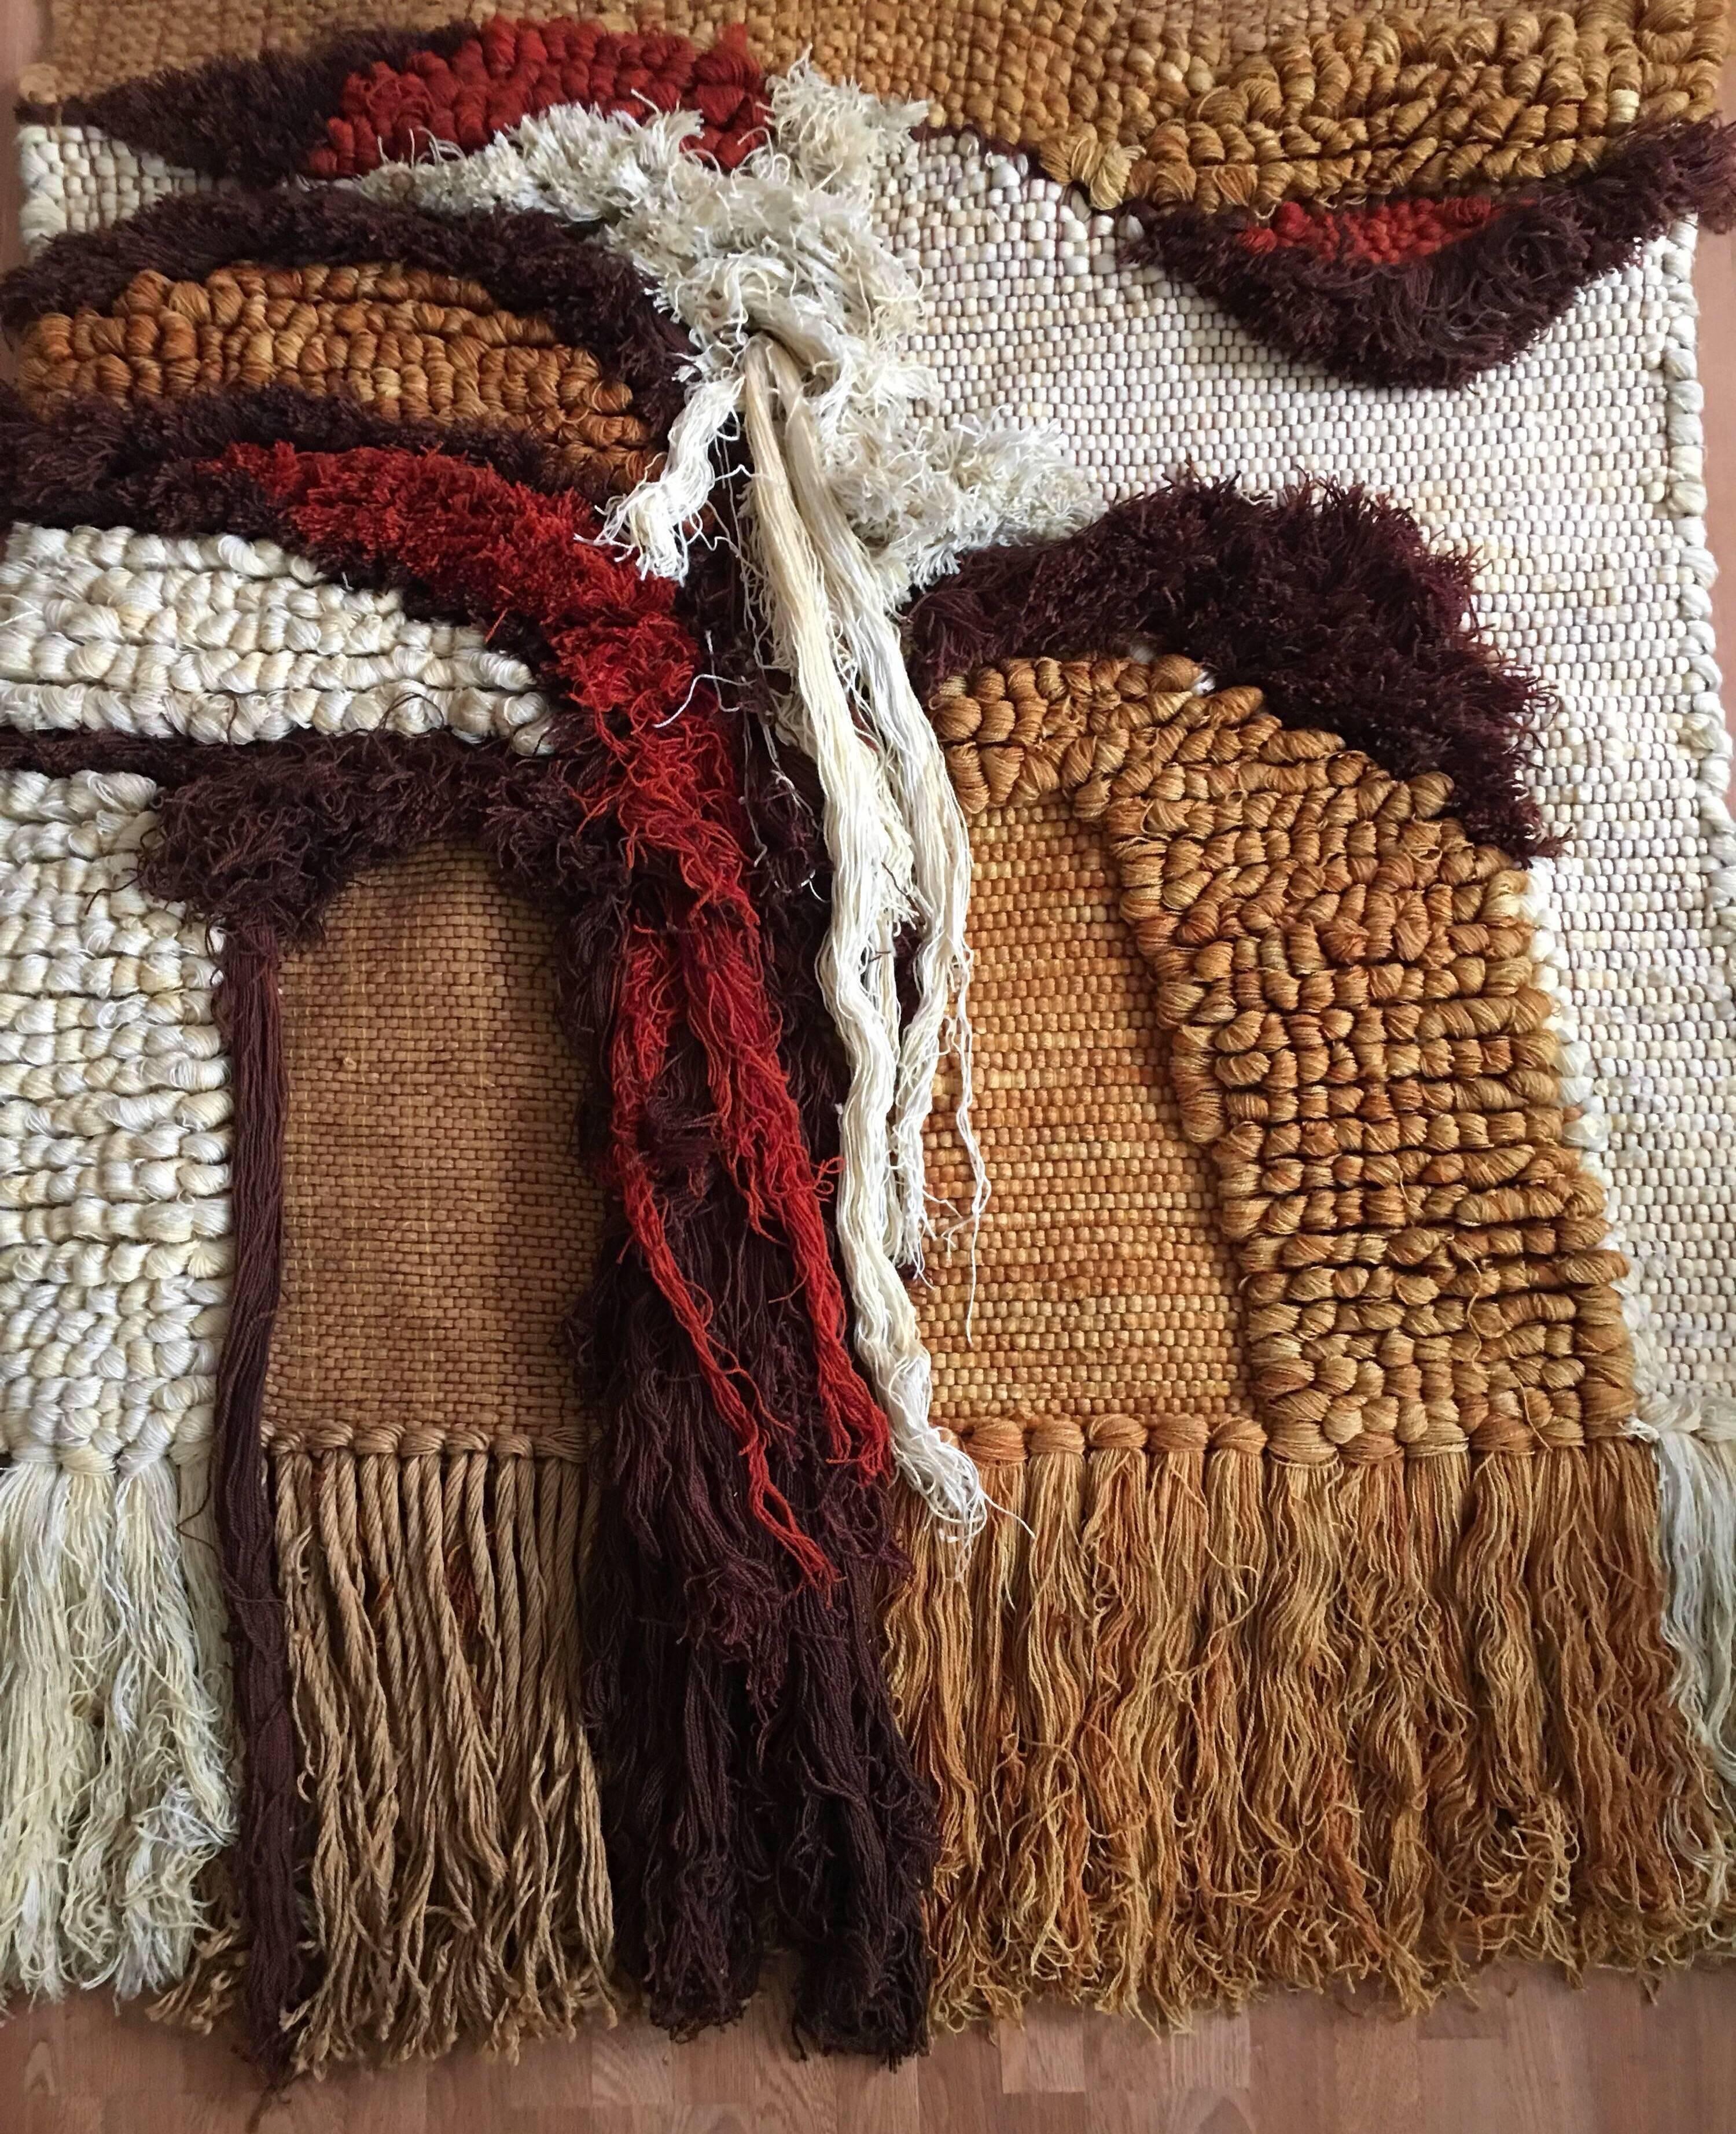 Late 20th Century Fiber Wall Art by Margo Farrin O’Connor for Ted Morris & Associates